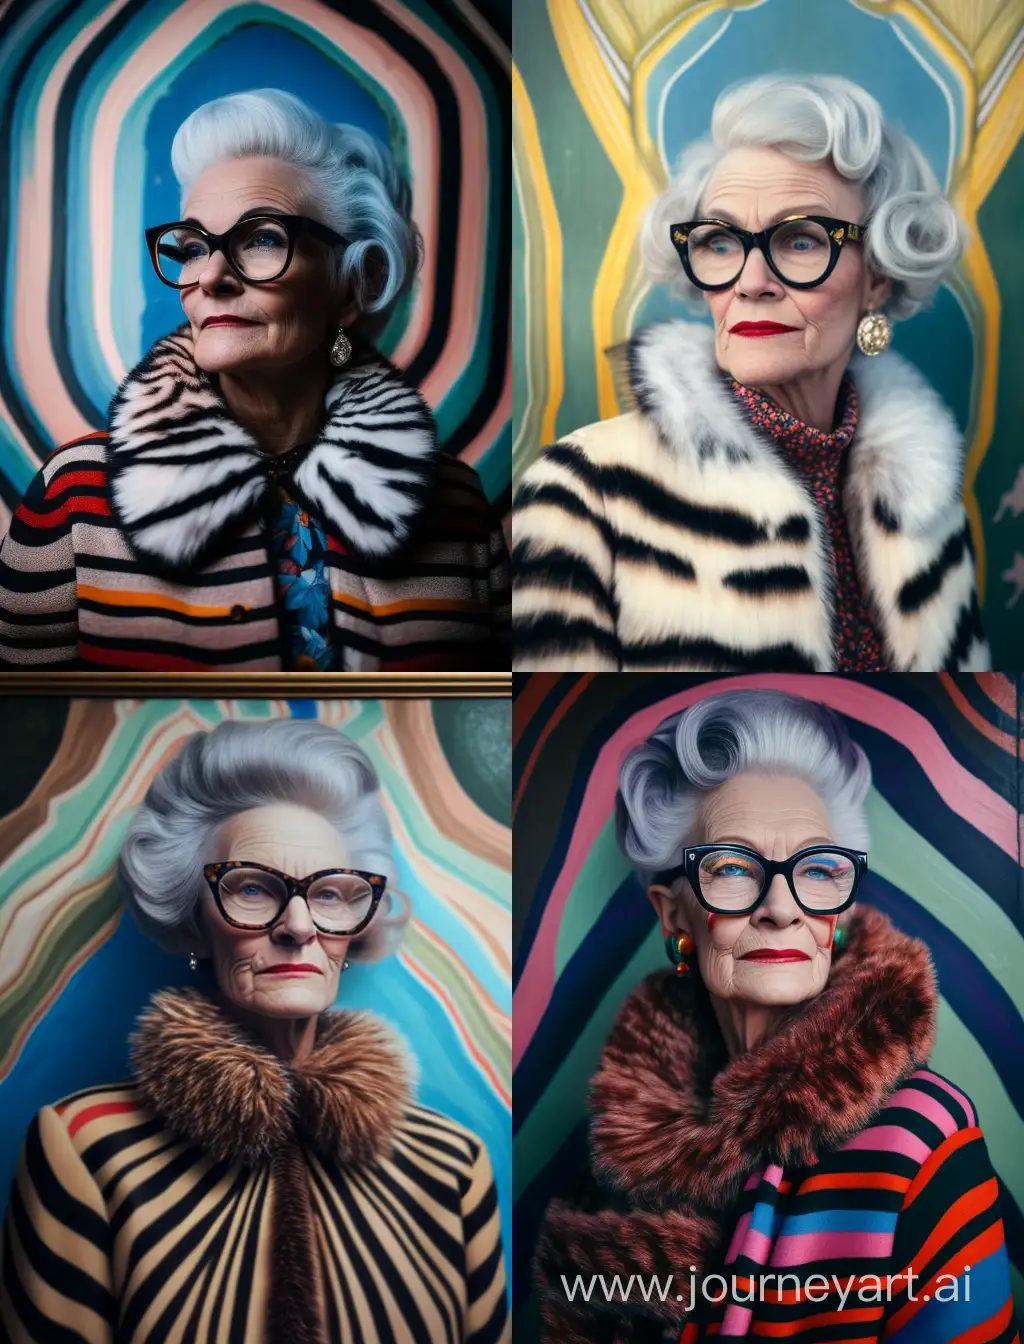 Elegant-Older-Russian-Woman-in-Eclectic-Fashion-Posing-by-Striped-Mural